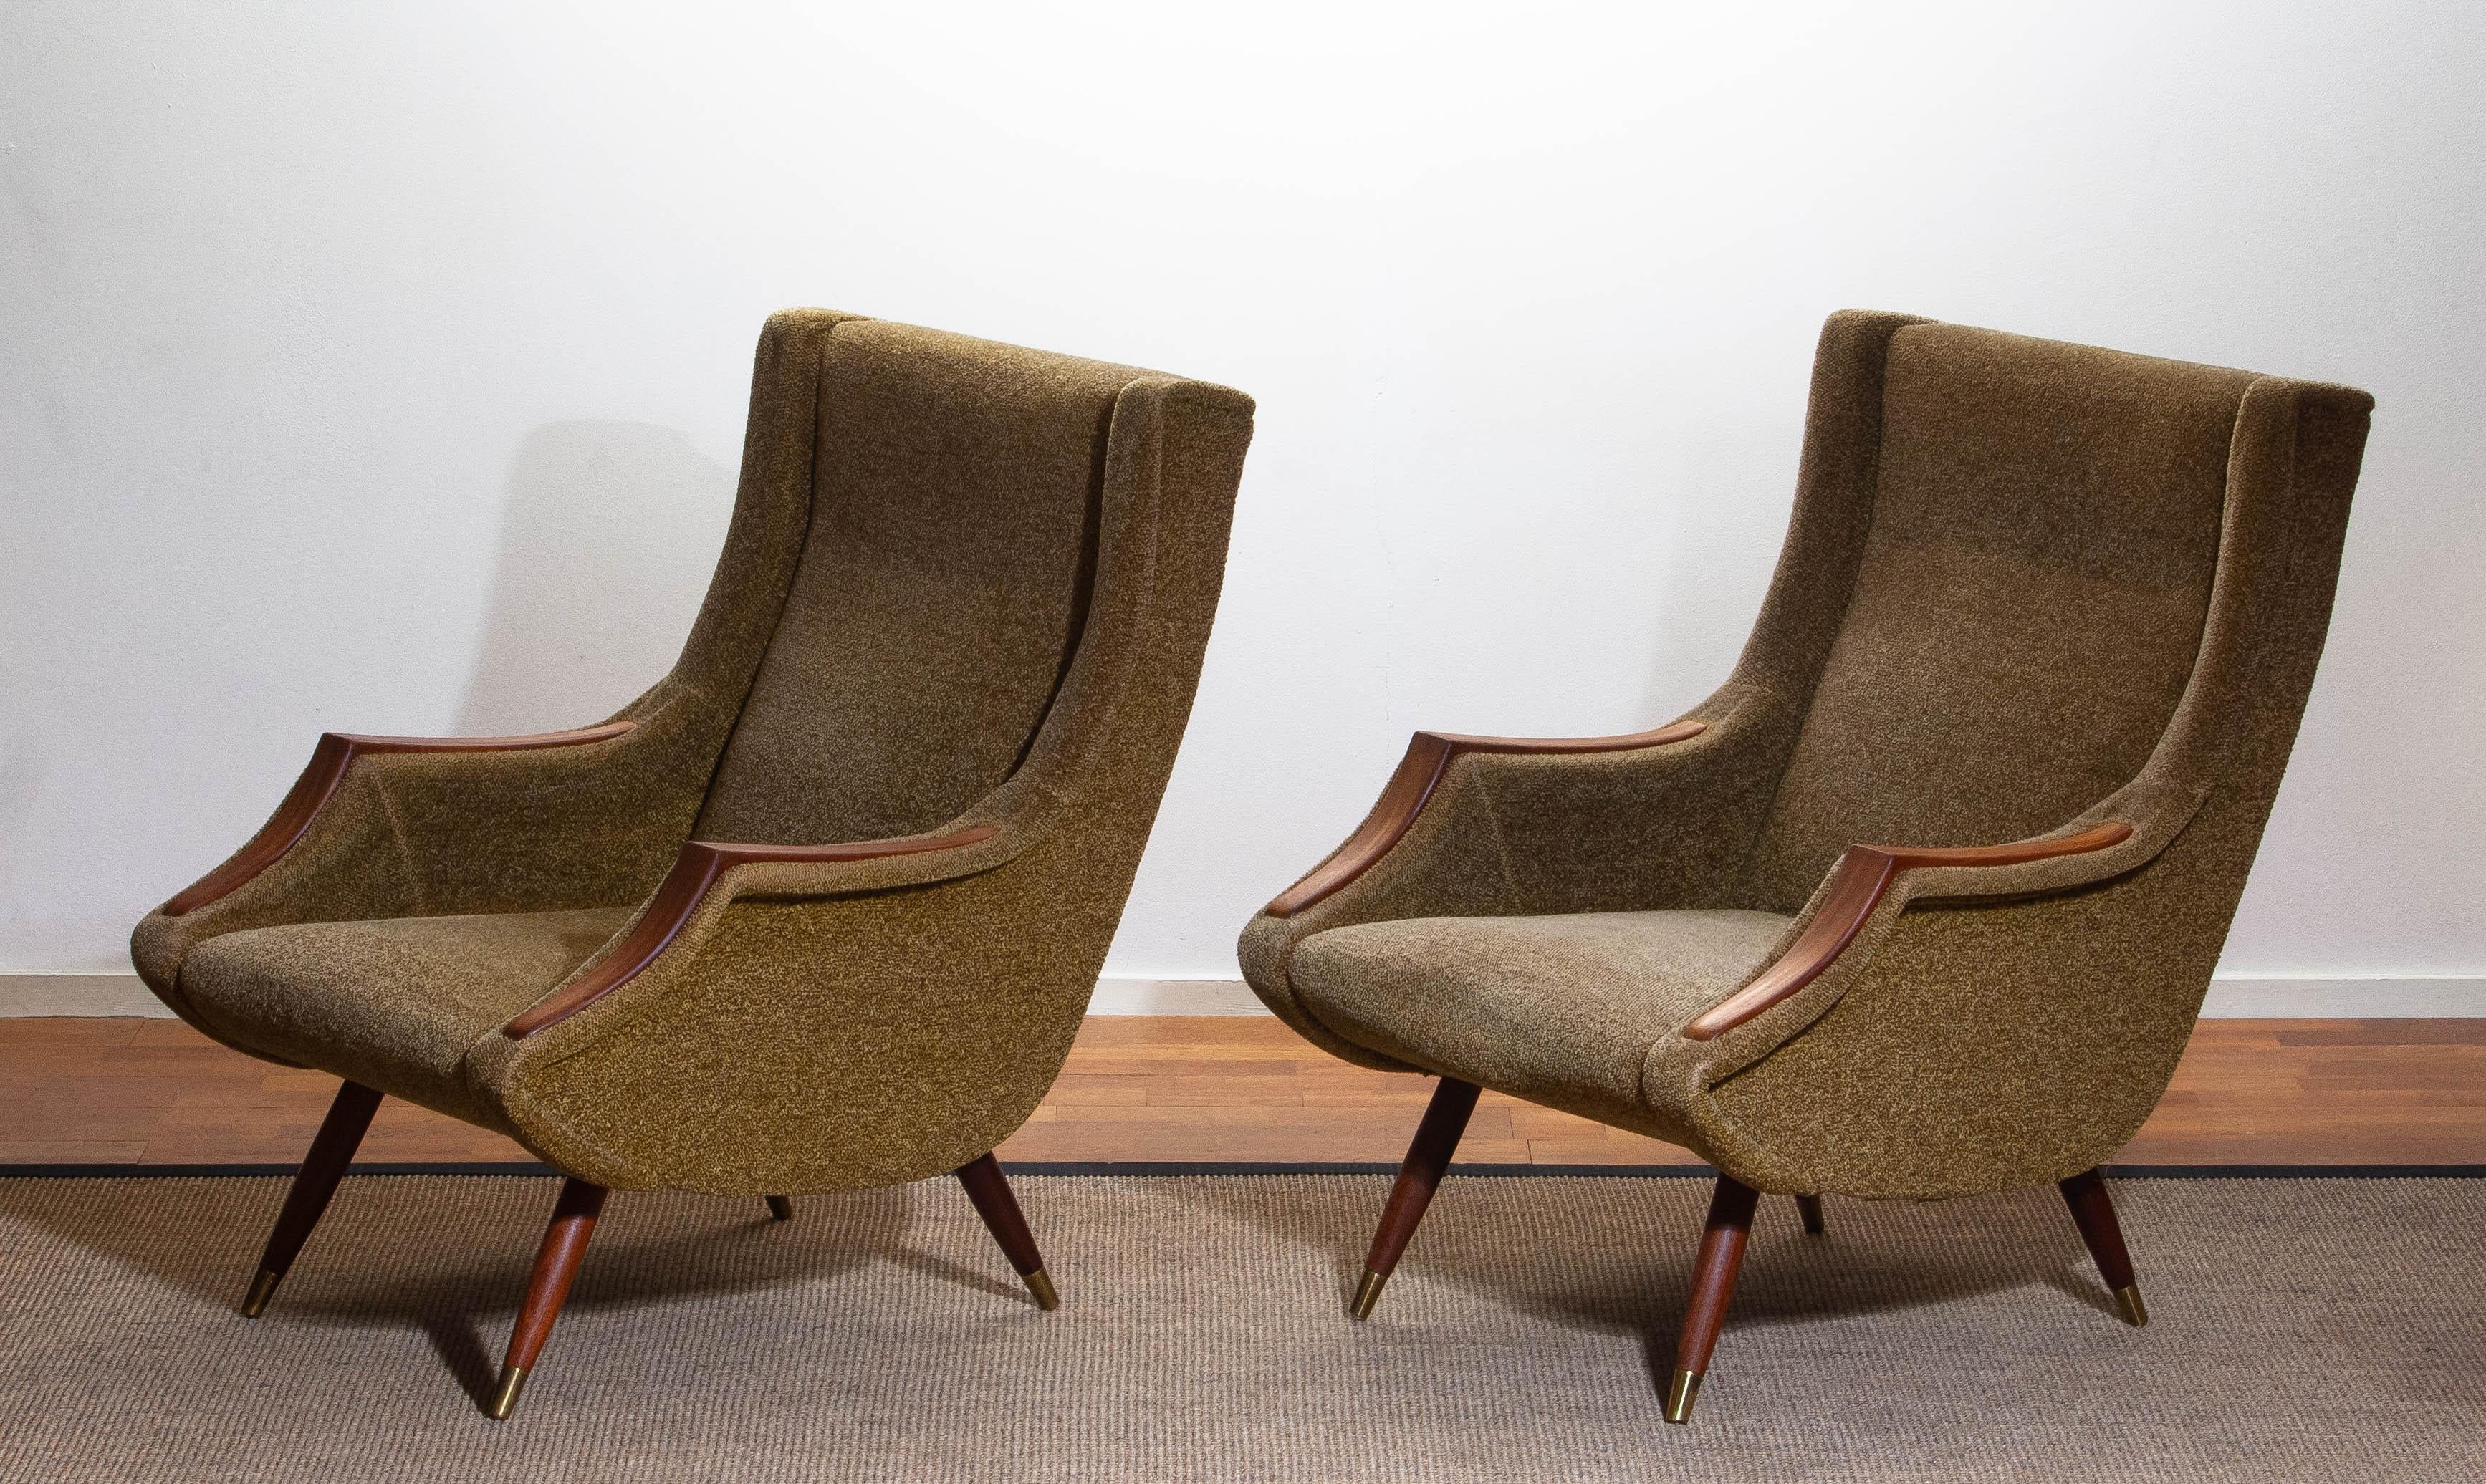 Fabric Set Italian Lounge / Easy Chairs from the 1950s by Aldo Morbelli for Isa Bergamo